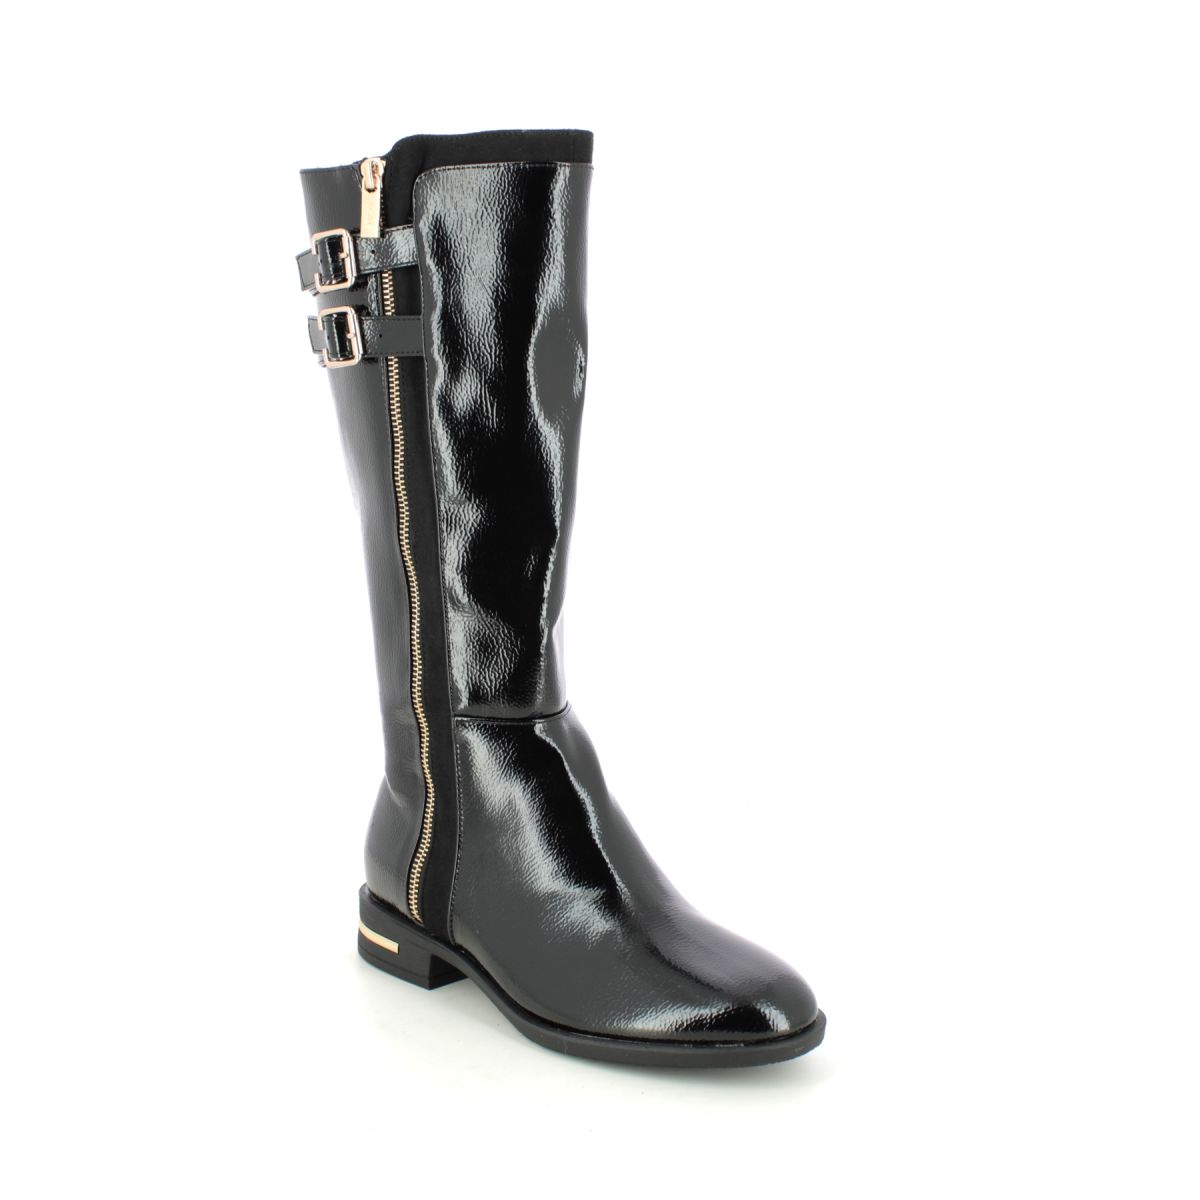 Lotus Louella Estelle Black patent Womens knee-high boots in a Plain Man-made in Size 3